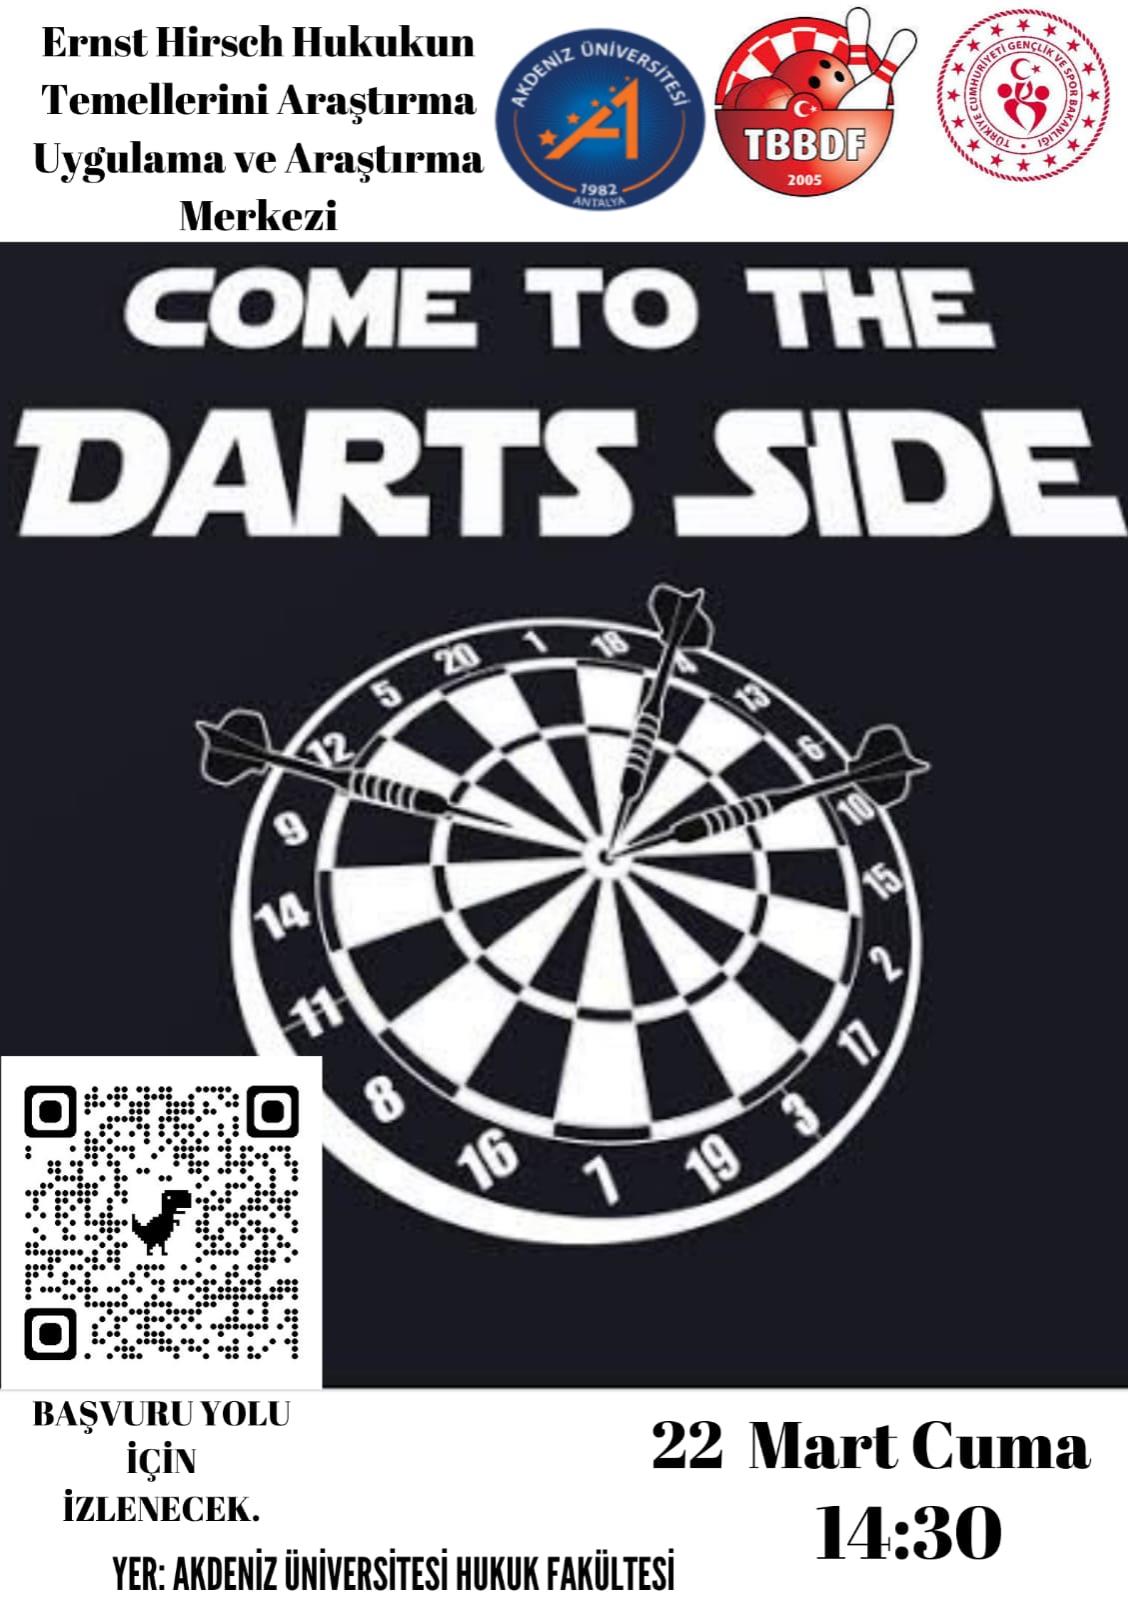 COME TO THE DARTS SIDE